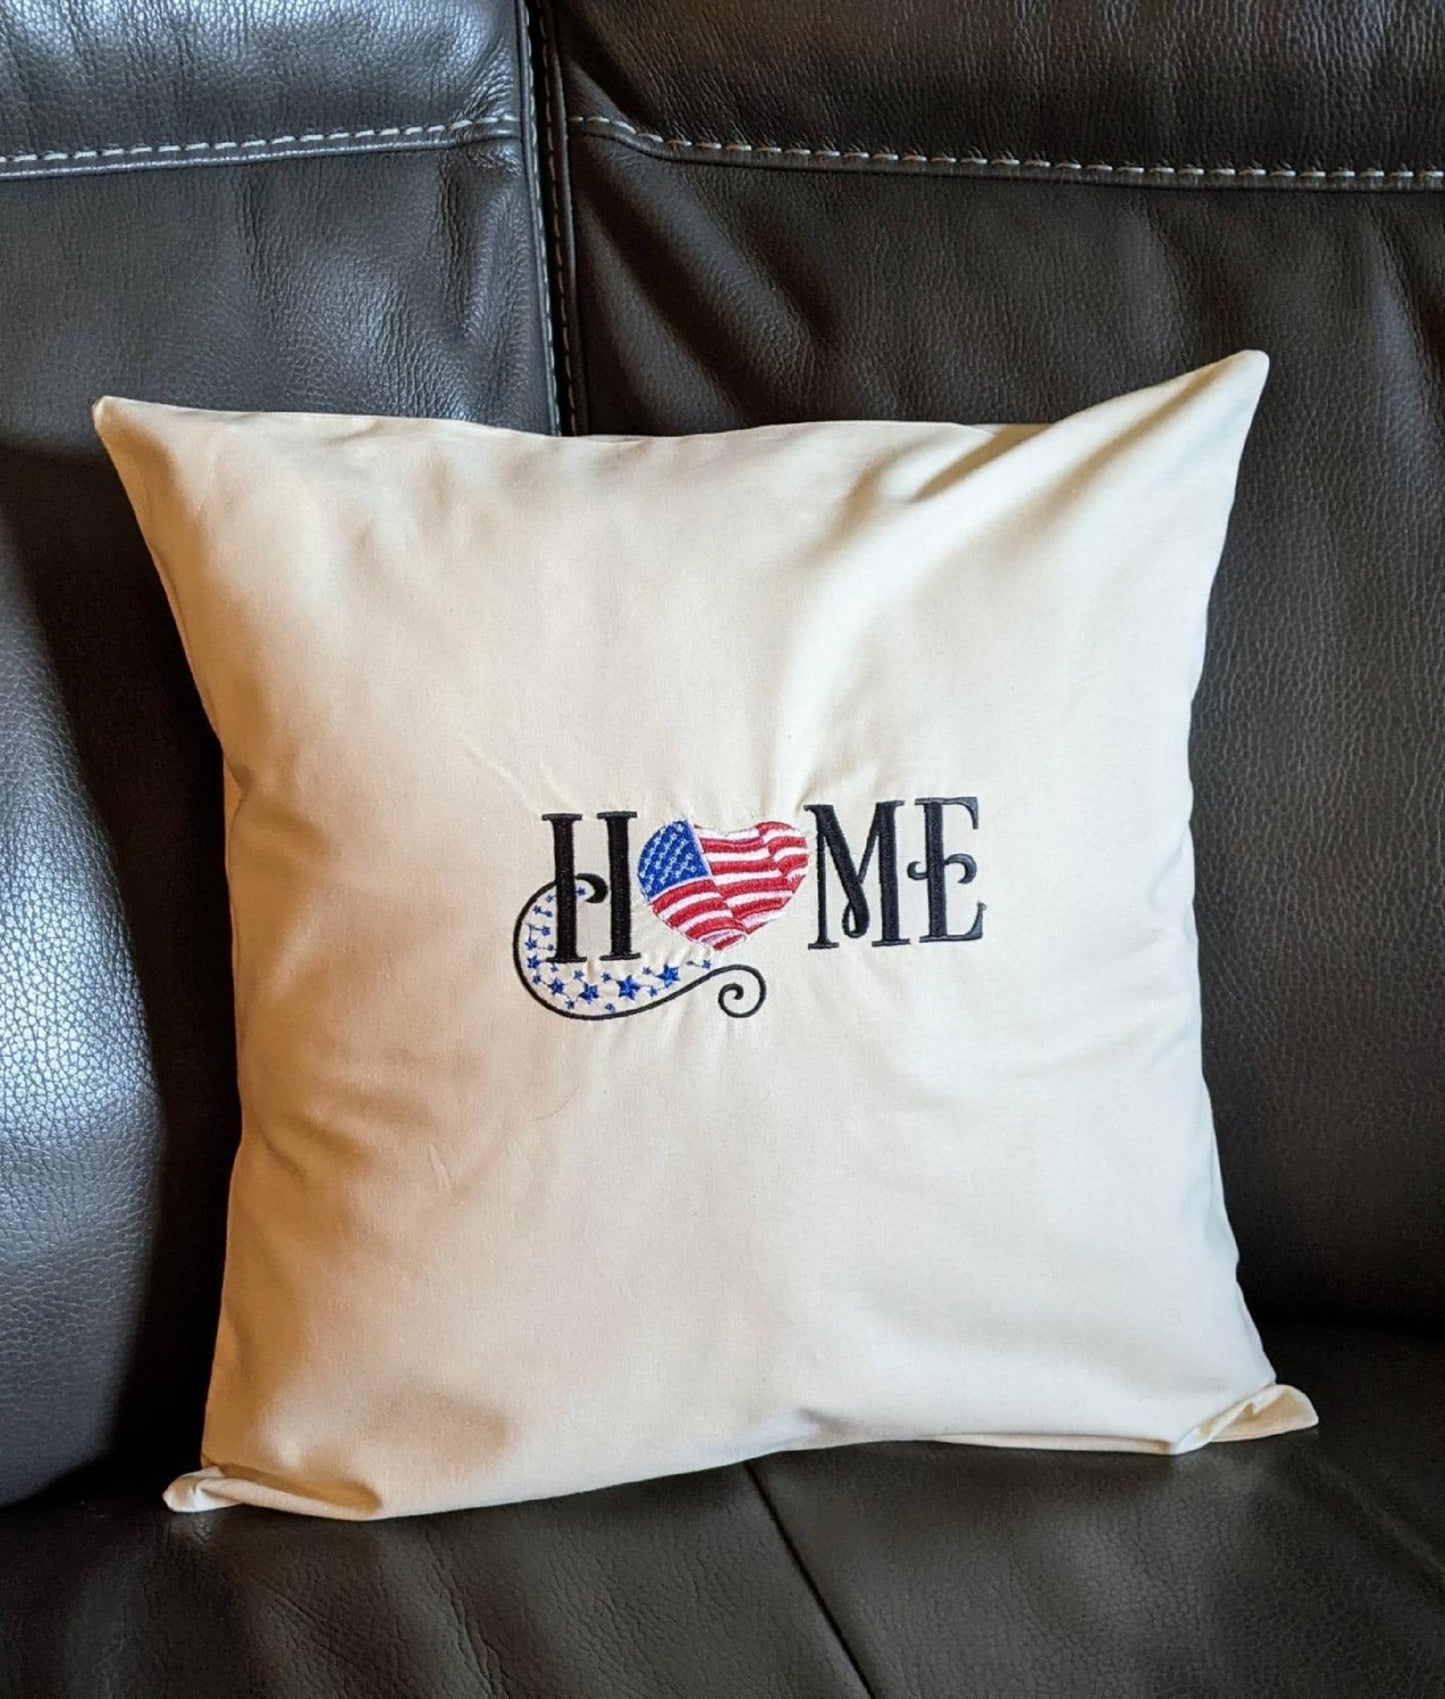 Throw Pillow-Americana Theme-Approx. 17" x 17"-Machine Embroidered